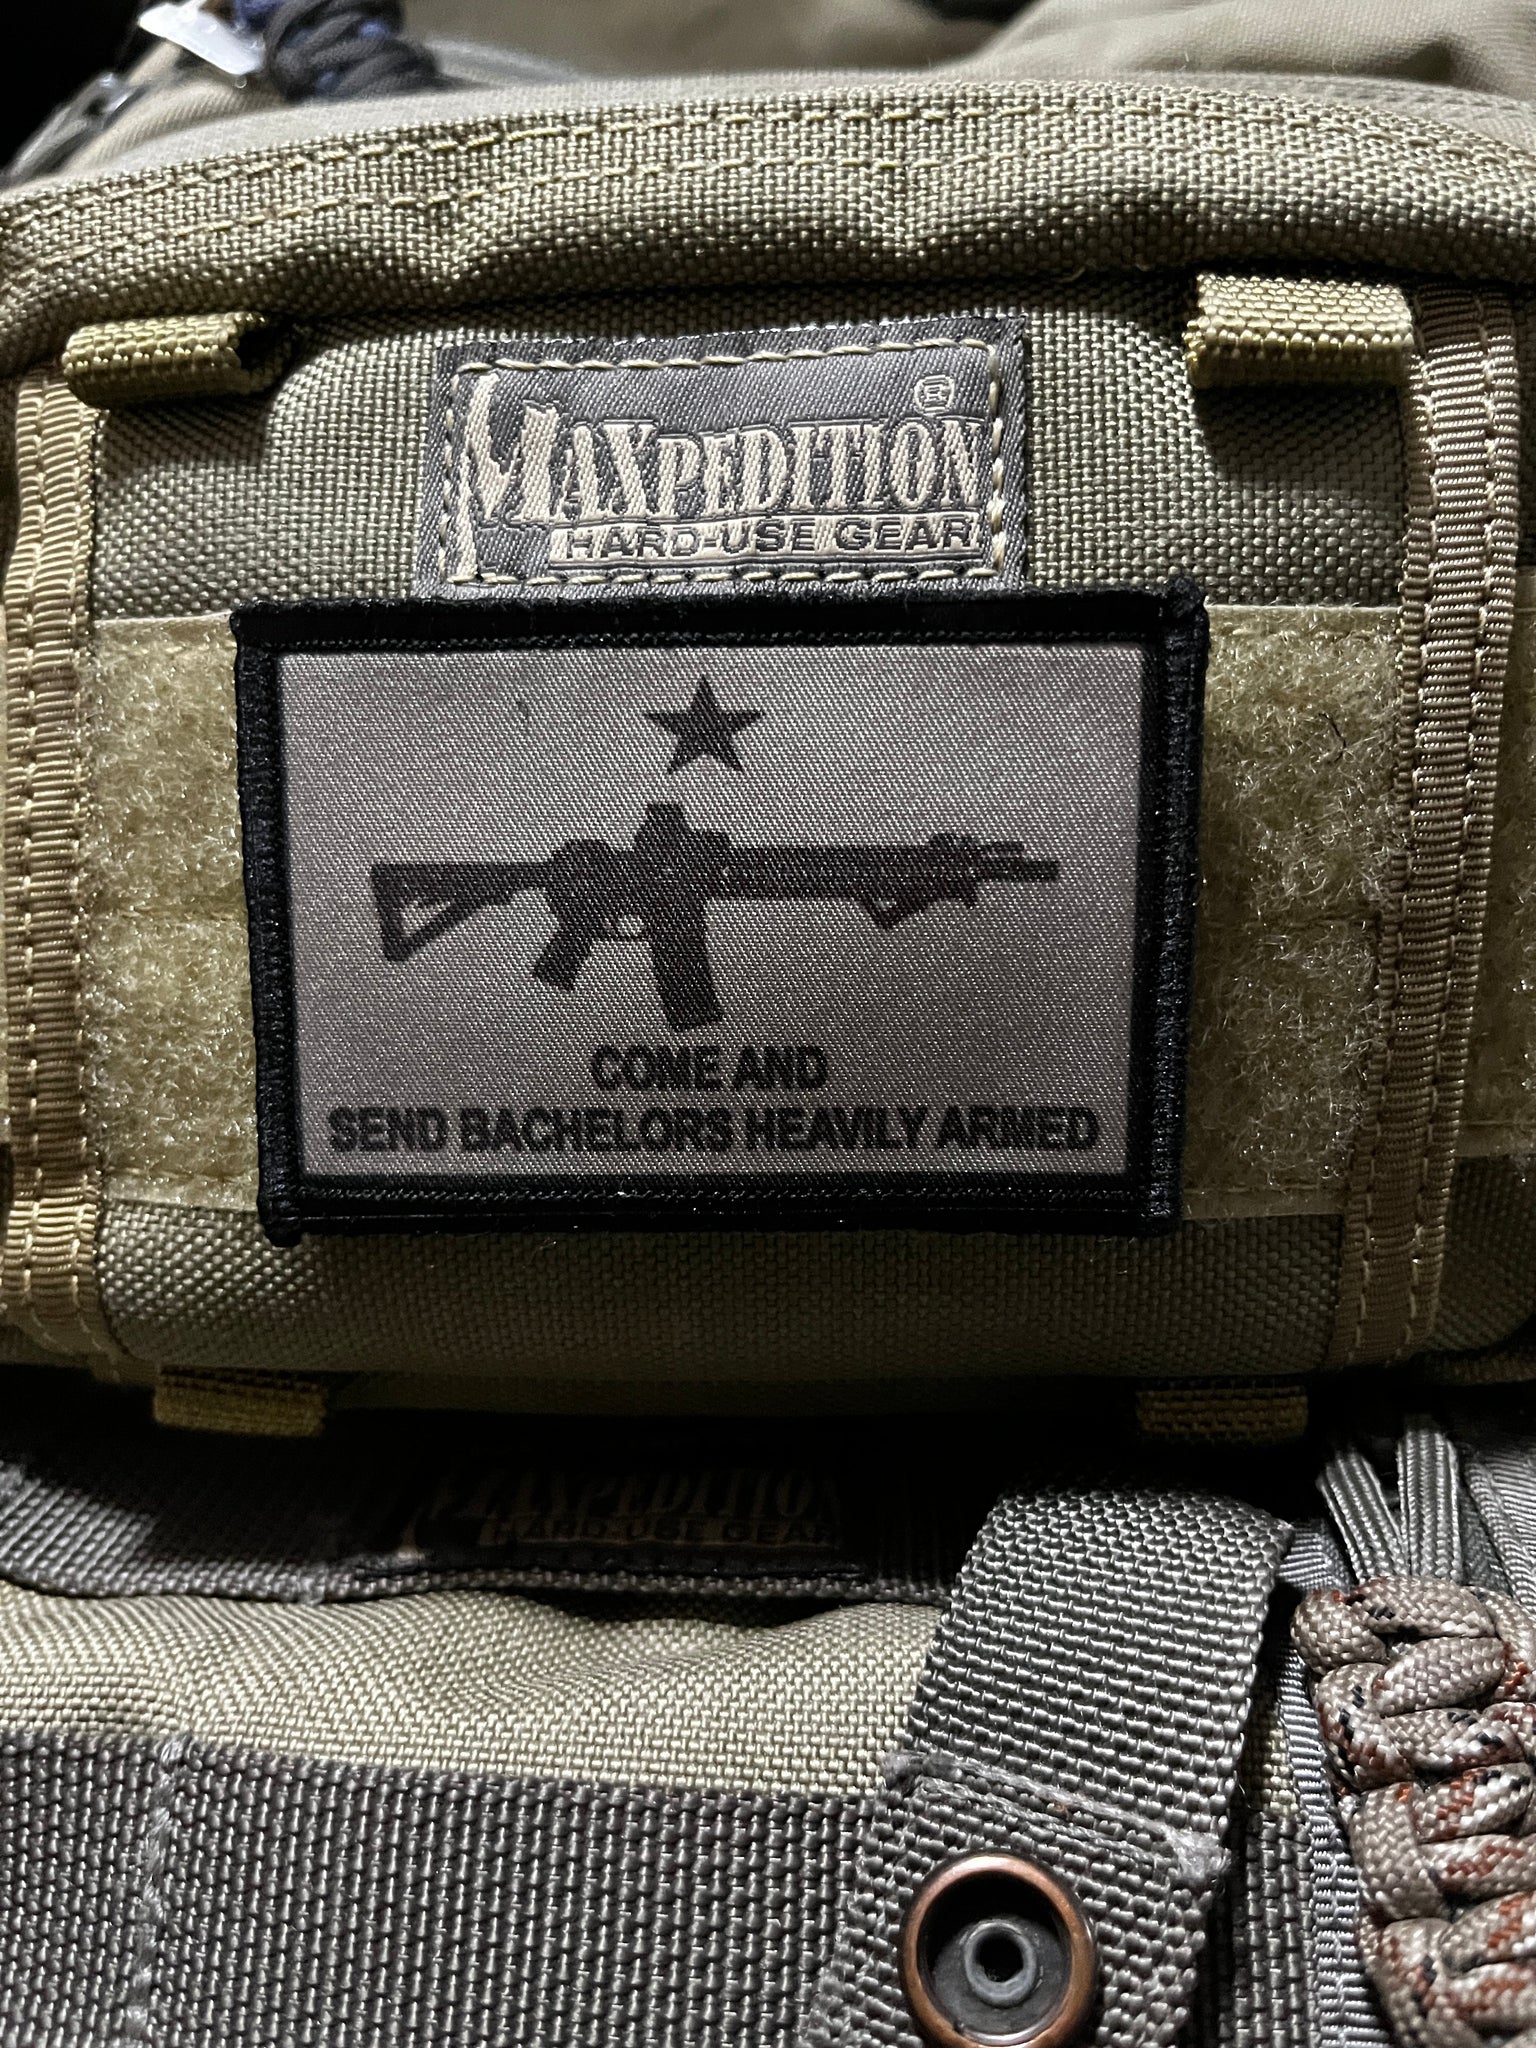 Come and Send Bachelors Heavily Armed Morale Patch Morale Patches Redheaded T Shirts 